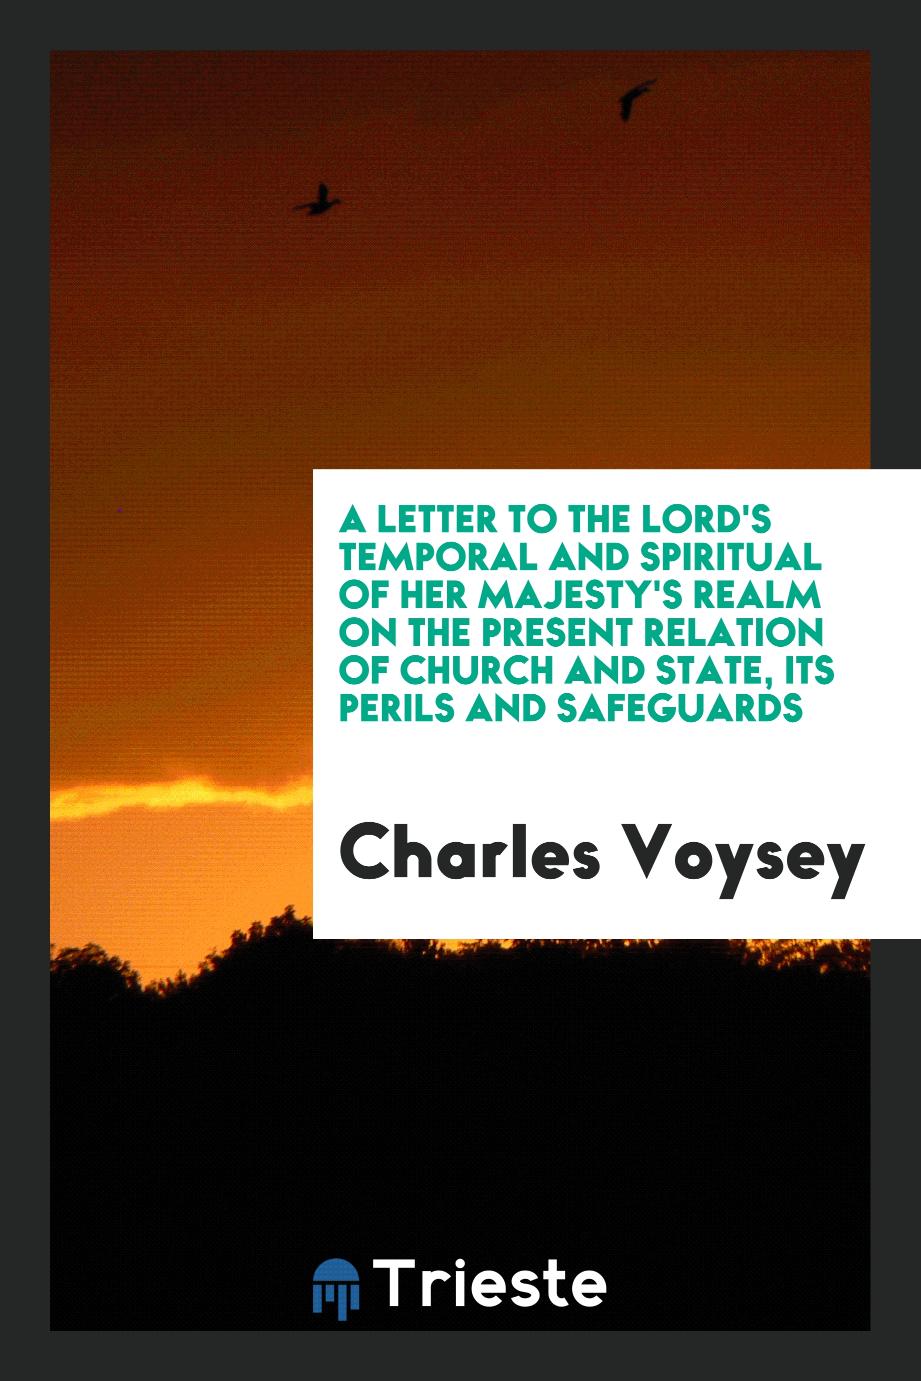 A Letter to the Lord's Temporal and Spiritual of Her Majesty's Realm on the present relation of church and state, its perils and safeguards